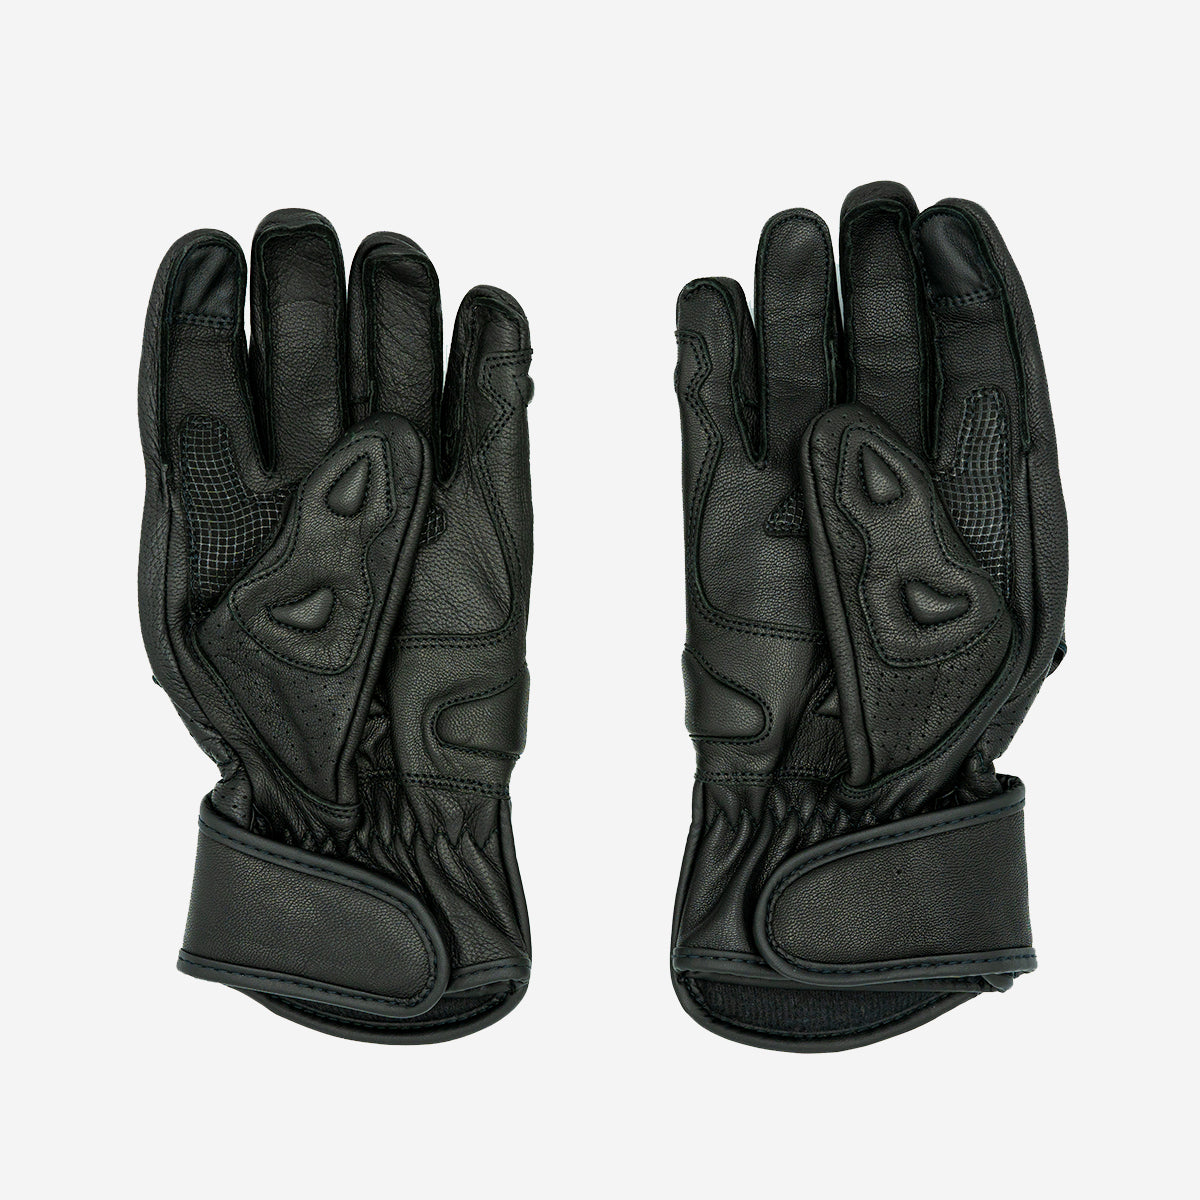 HANDY Motorcycle Safety Gloves